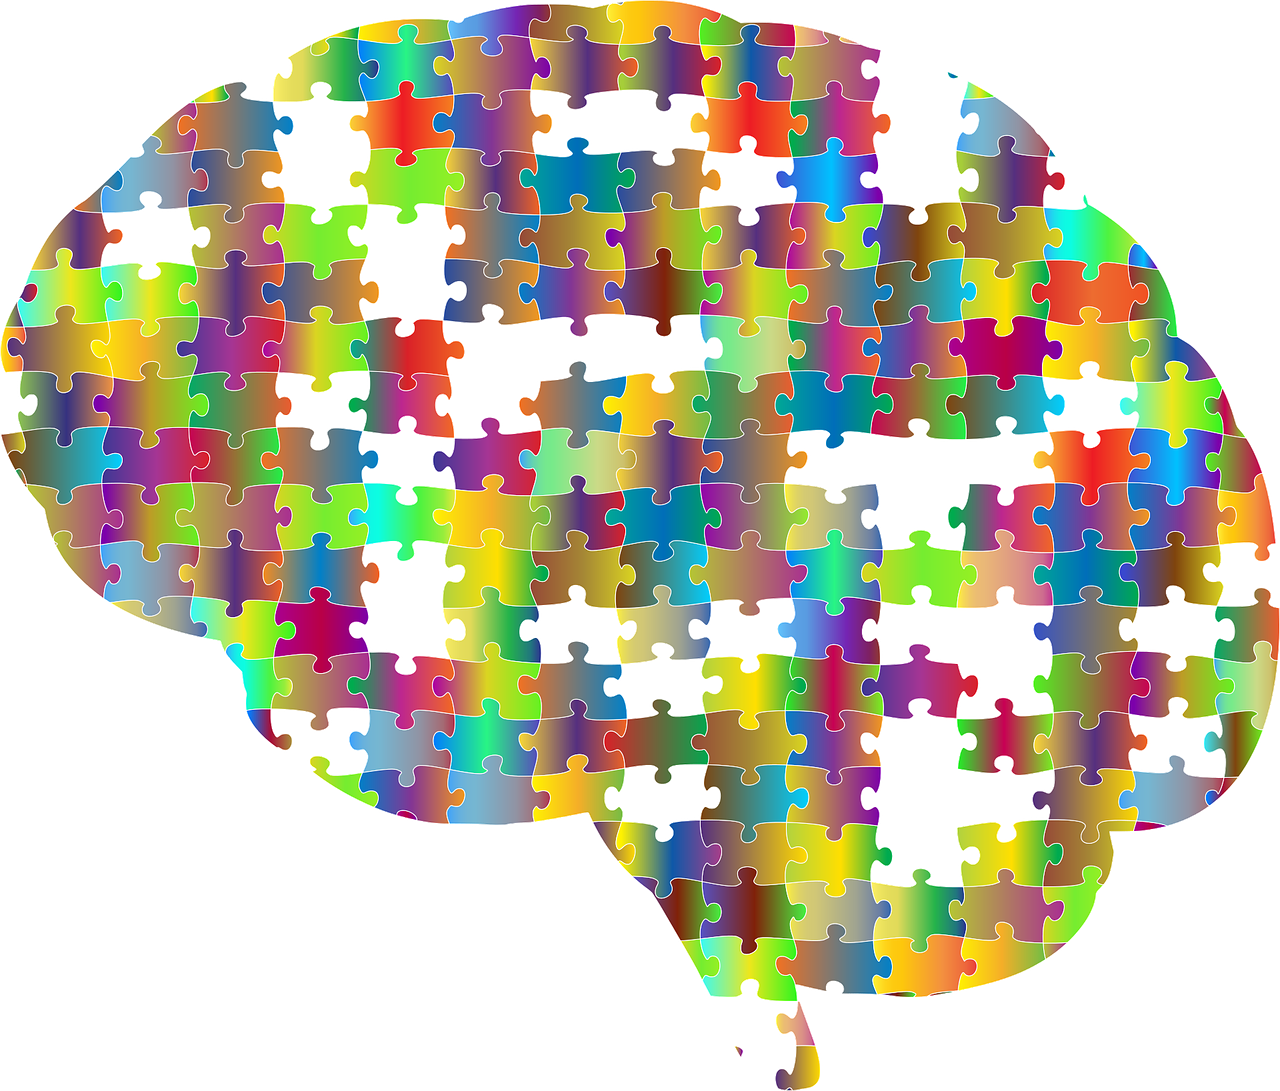 Brain represented by puzzle pieces.